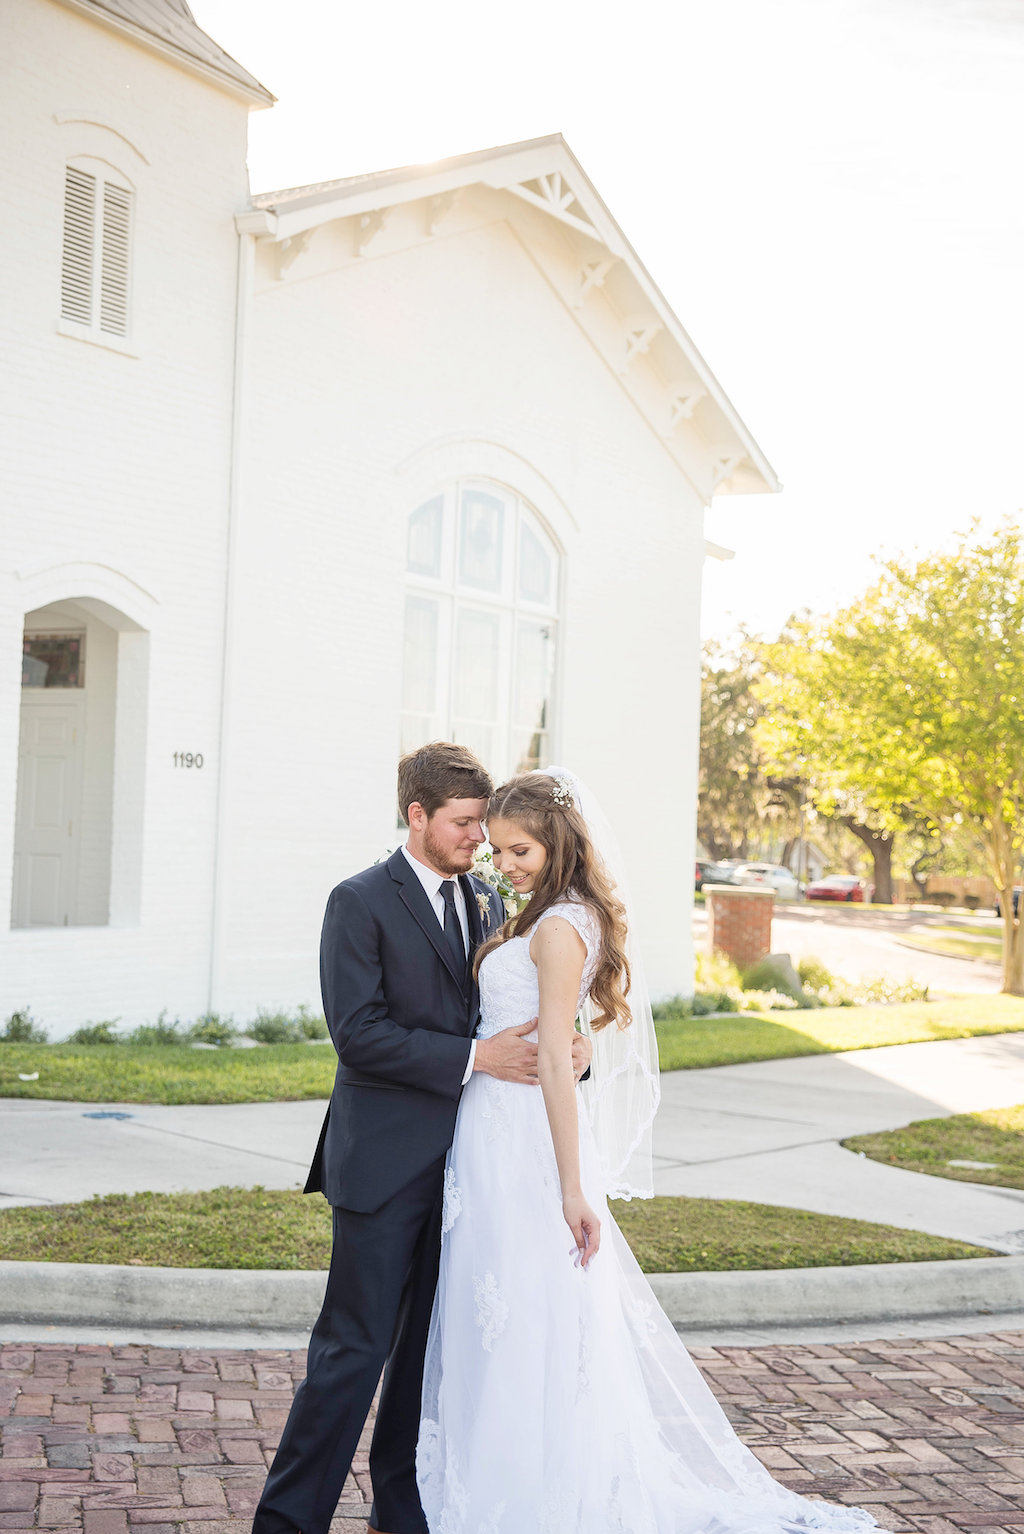 Outdoor Bride and Groom Wedding Portrait, Bride in A-Line Lace and Cap Sleeve Wedding Dress and Veil | Tampa Bay Photographer Kristen Marie Photography | Venue Palm Harbor White Chapel and Harbor Hall